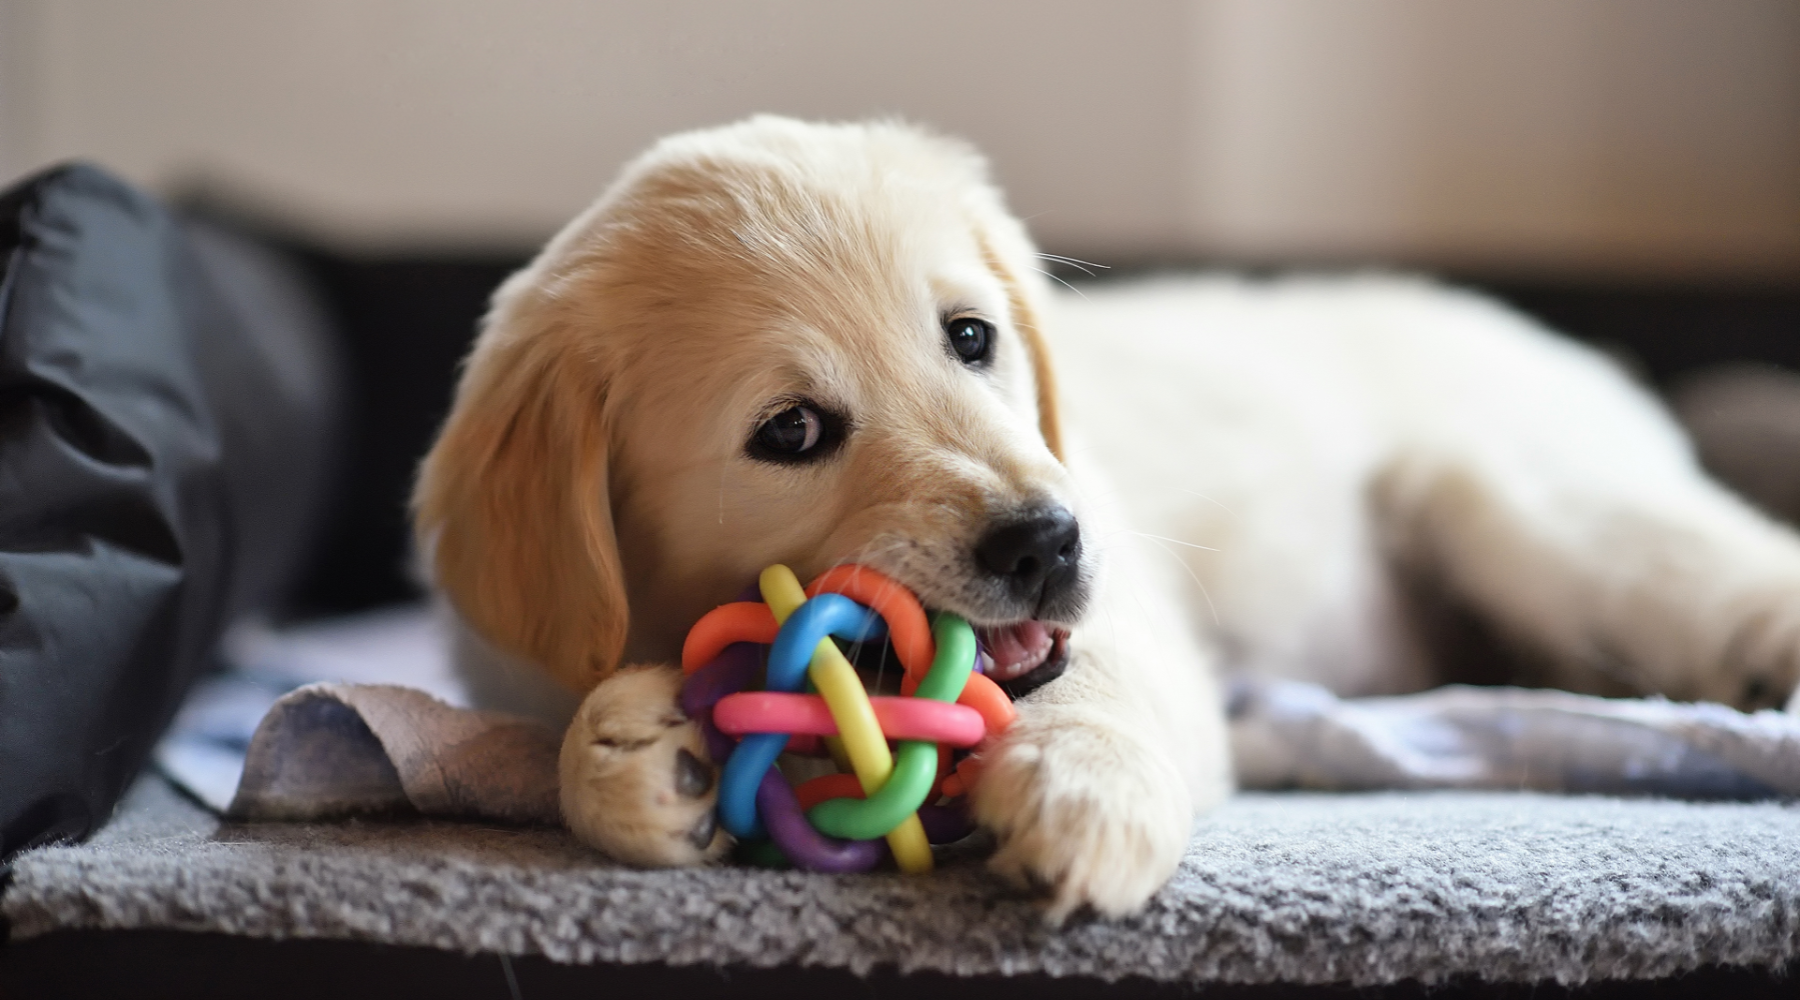 Puppy chewing a toy